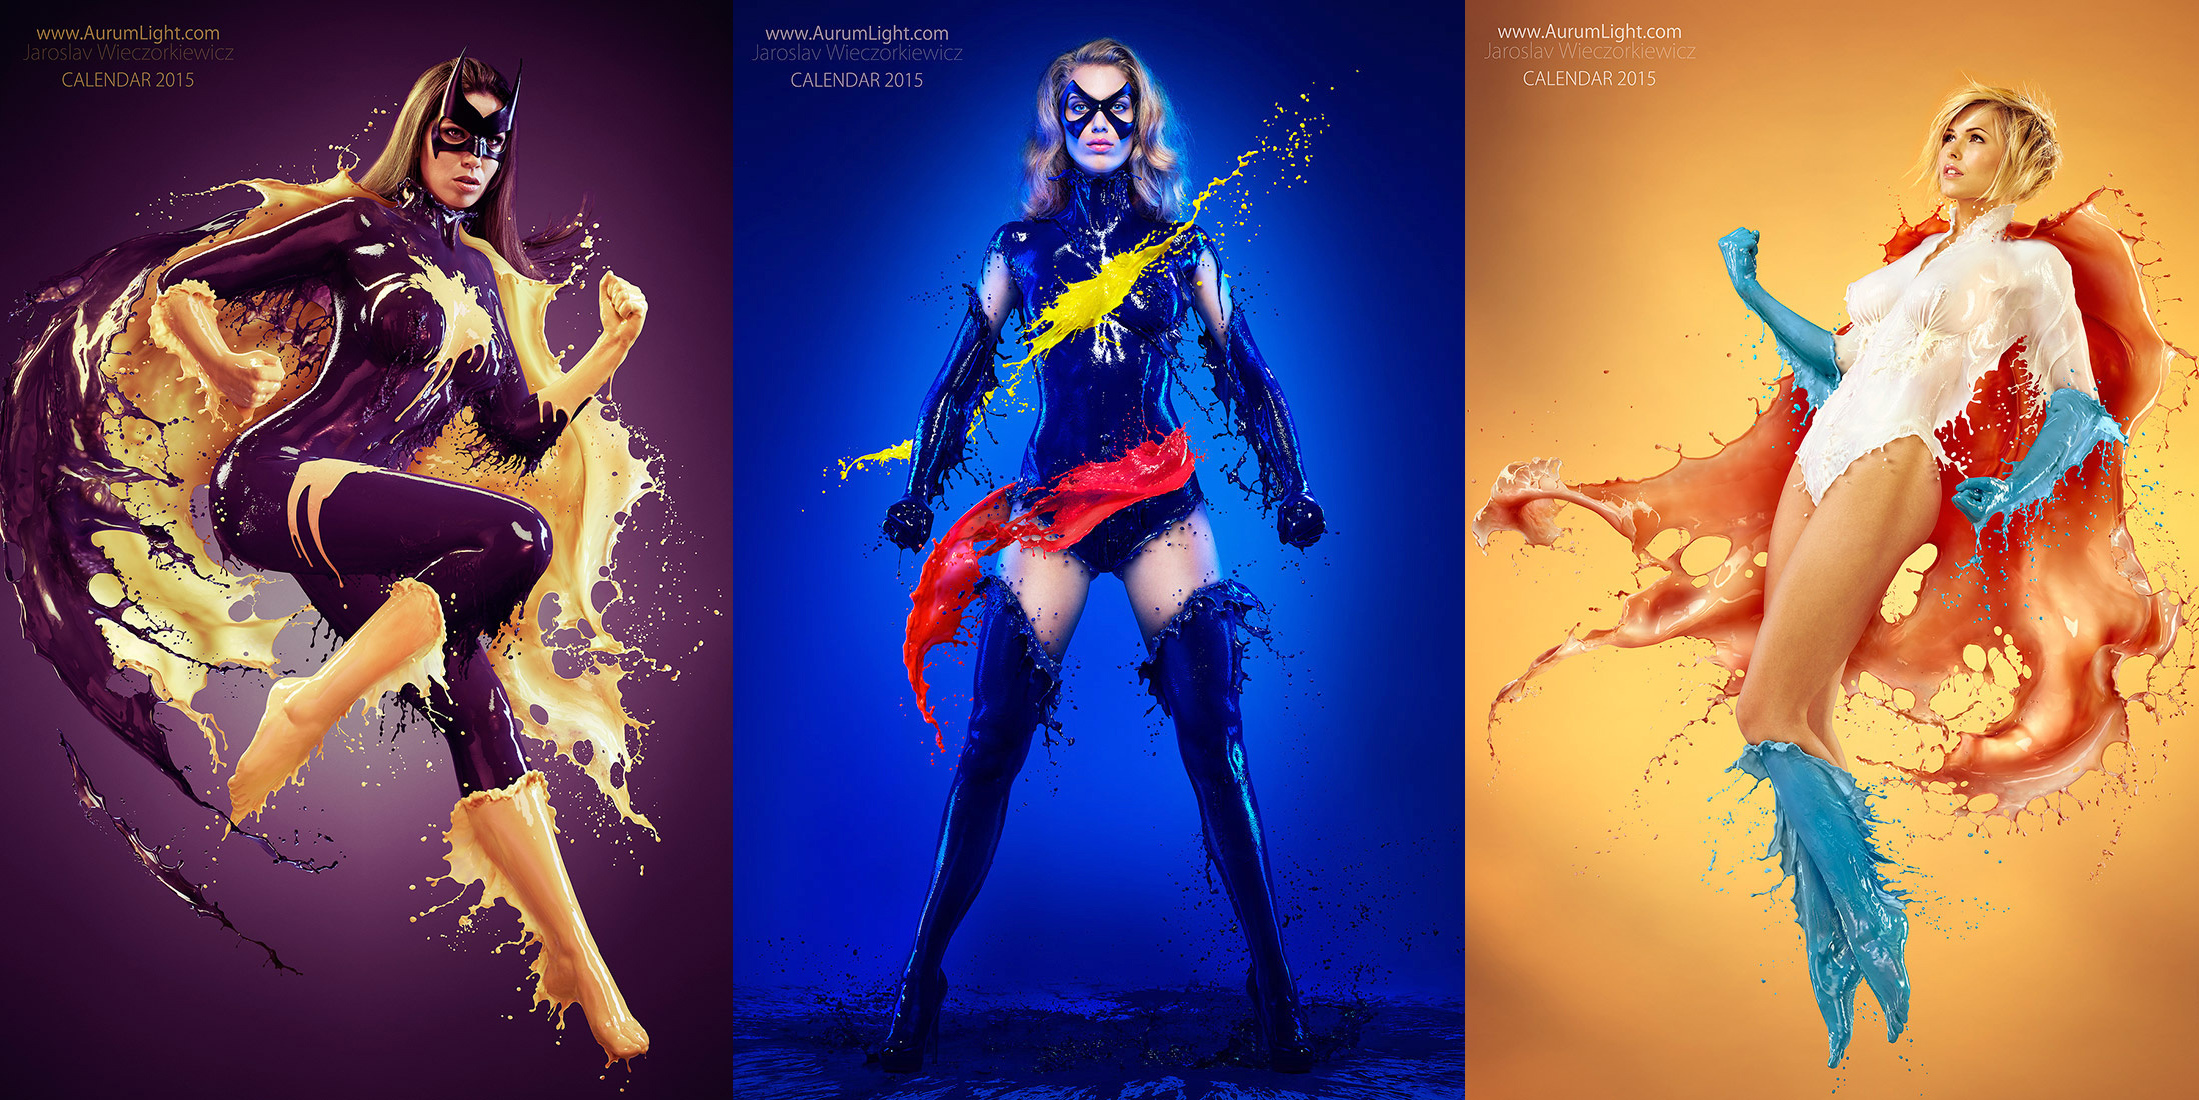 Photos of 'Splash Heroes' Who Wear Costumes Made of Milk... and Nothing Else (NSFW)